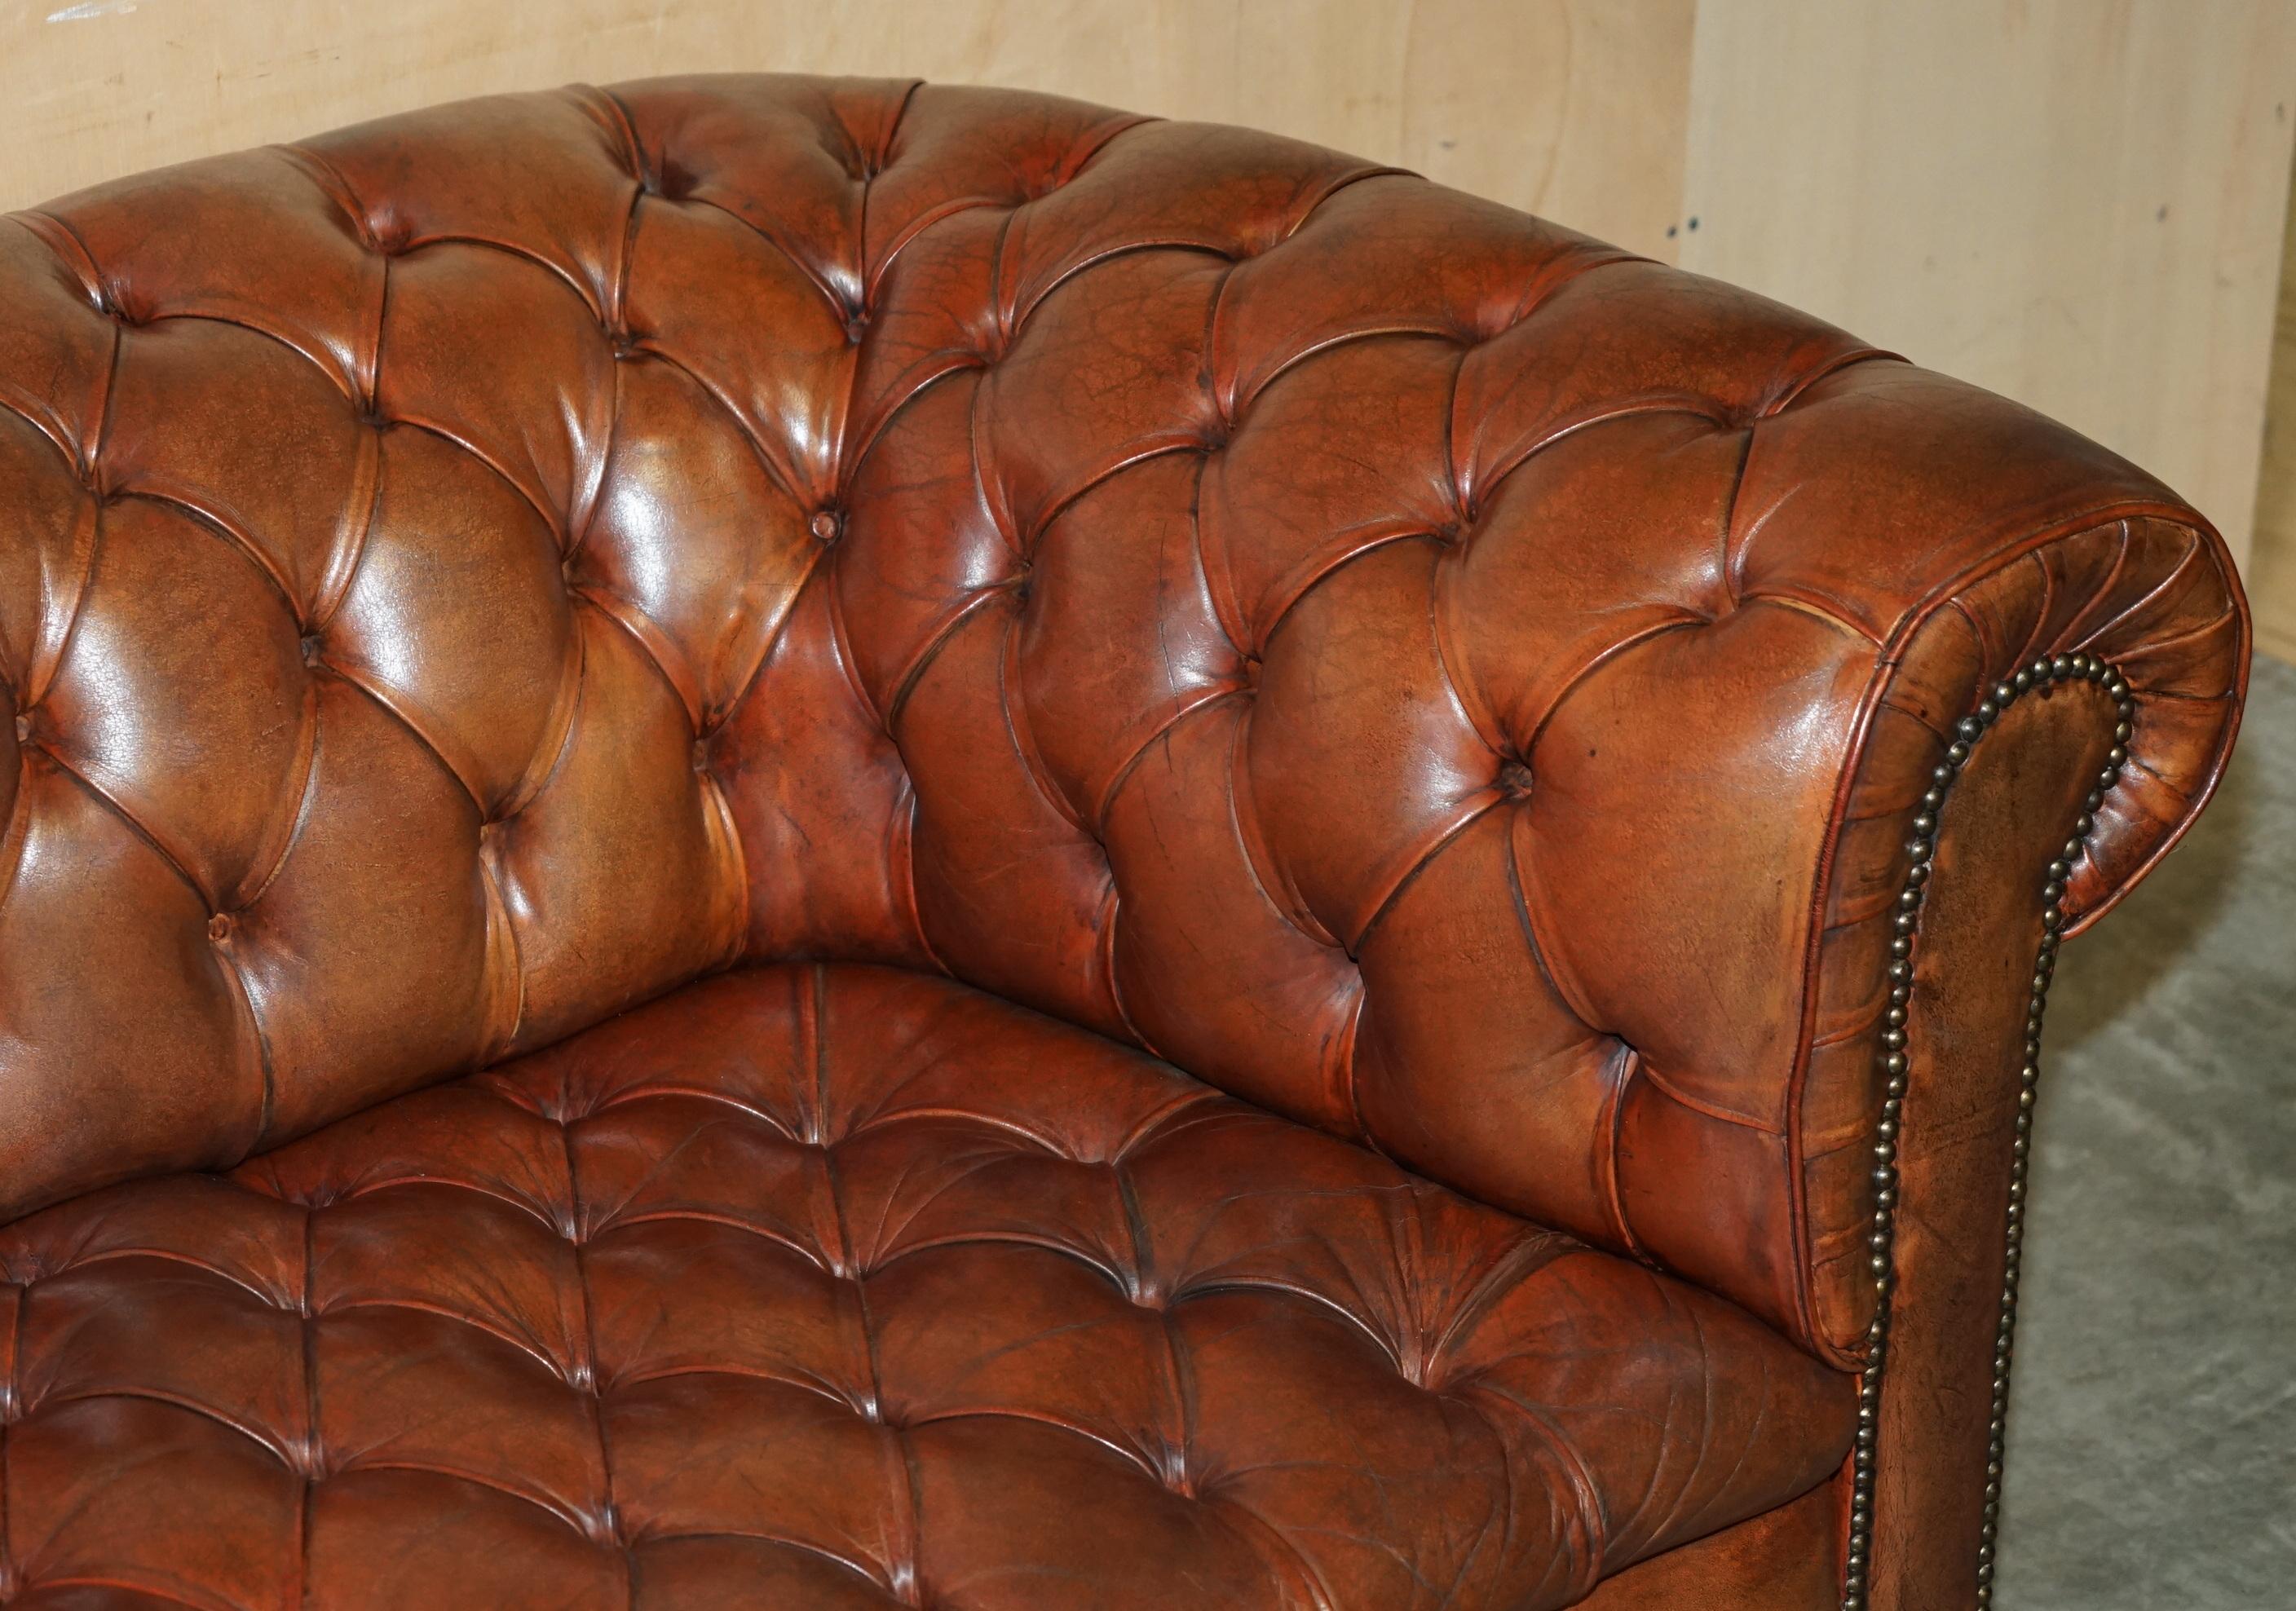 Leather FULLY COIL SPRUNG VINTAGE 1920's HAND DYED BROWN LEATHER CHESTERFIELD CLUB SOFA For Sale